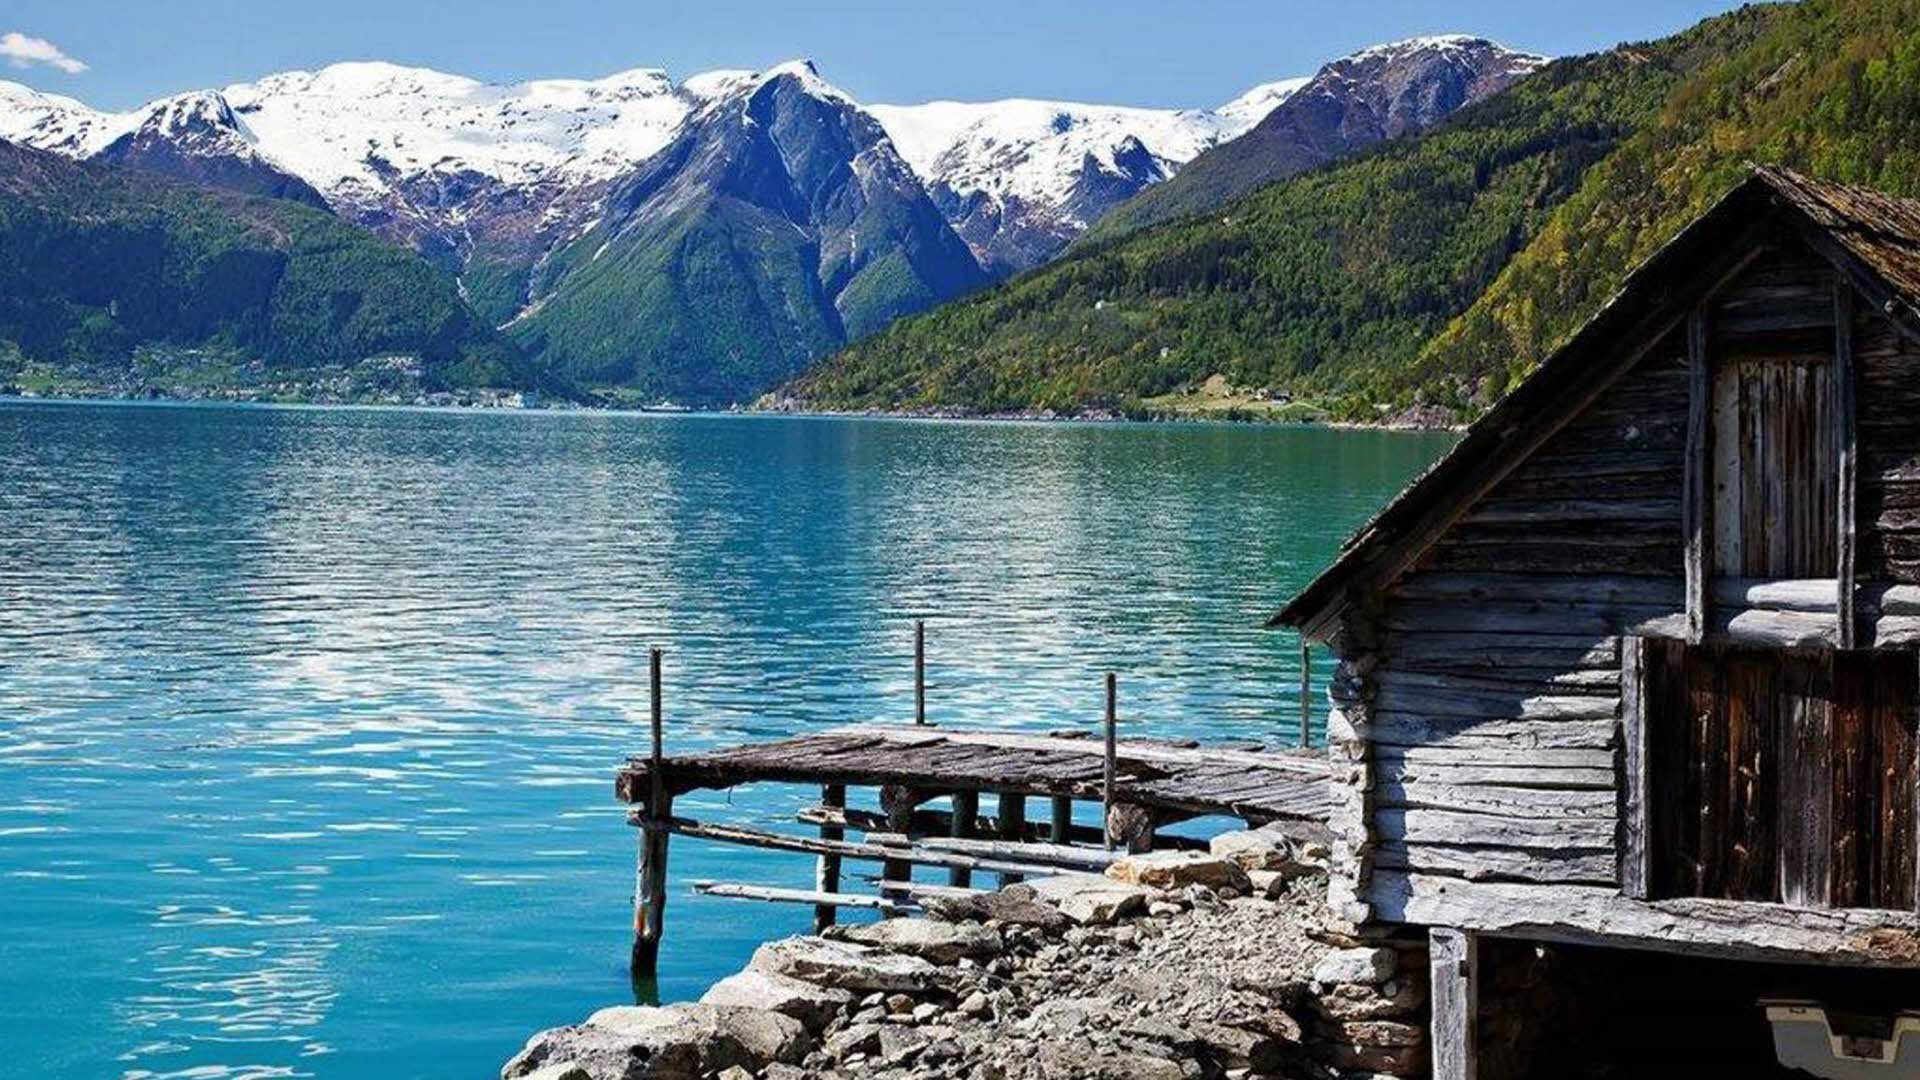 Ice green calm Fjaerlandfjord in summer. Old boathouse and pier in front. Dramatic tall mountains and glacier in distance.